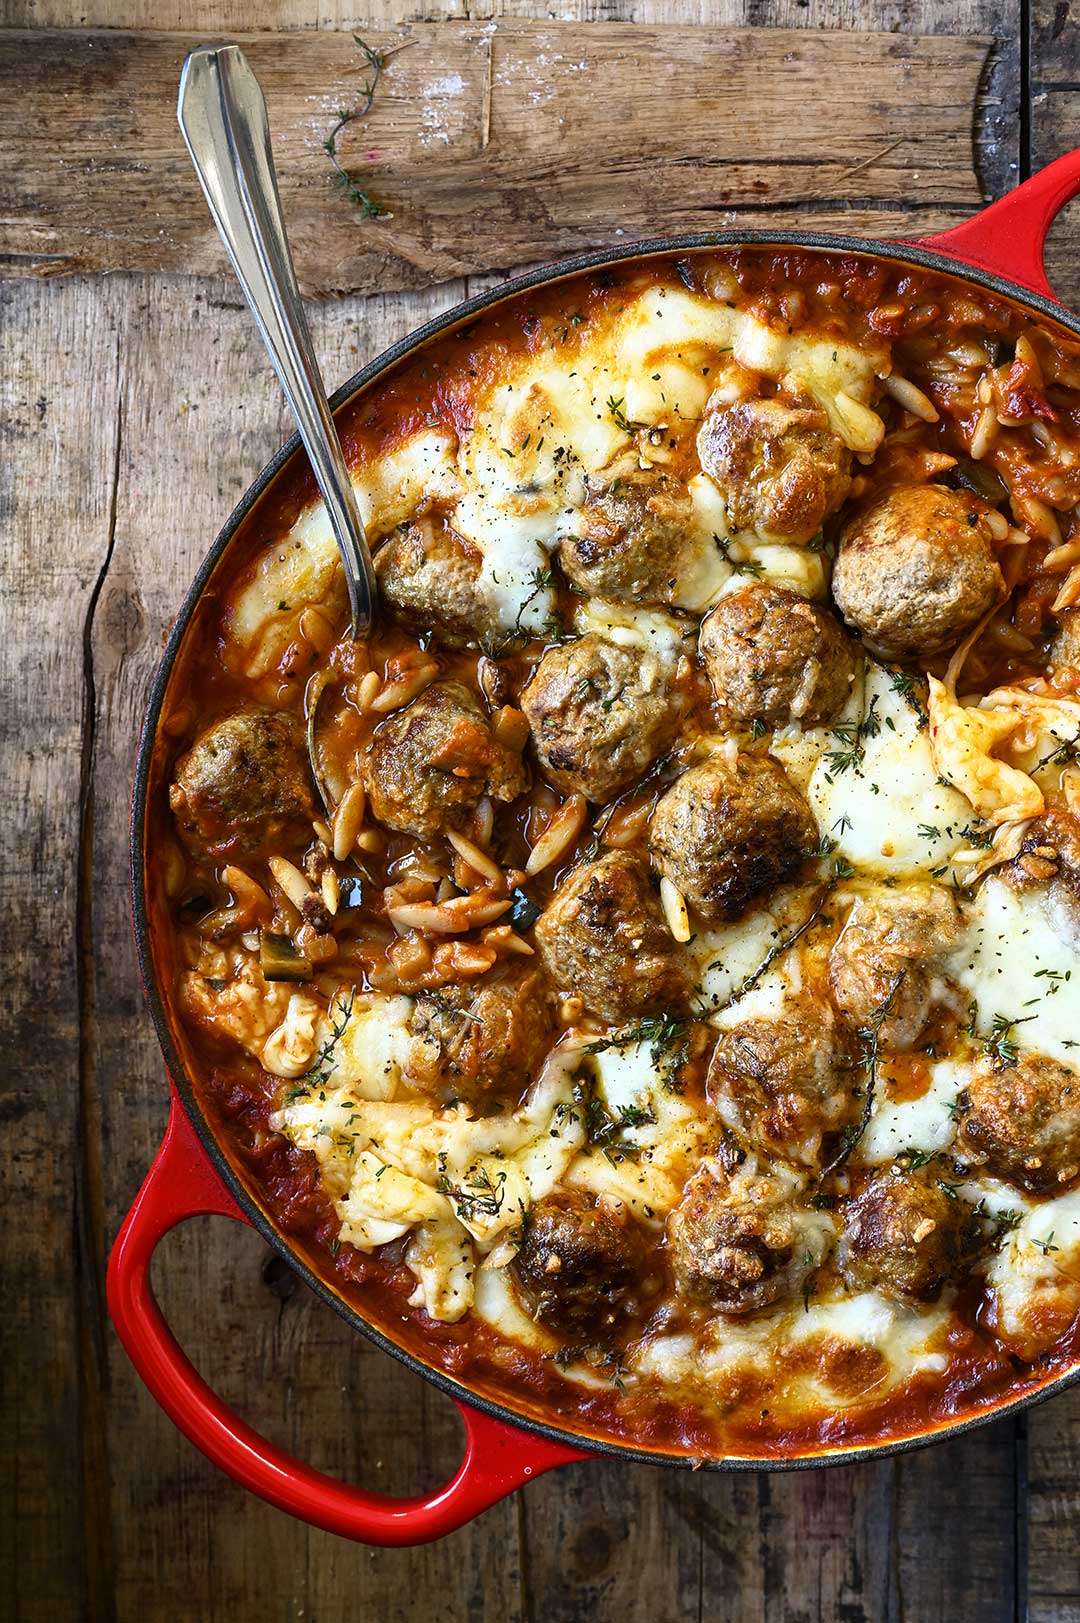 serving dumplings | Baked Meatballs with Orzo in Roasted Pepper Sauce